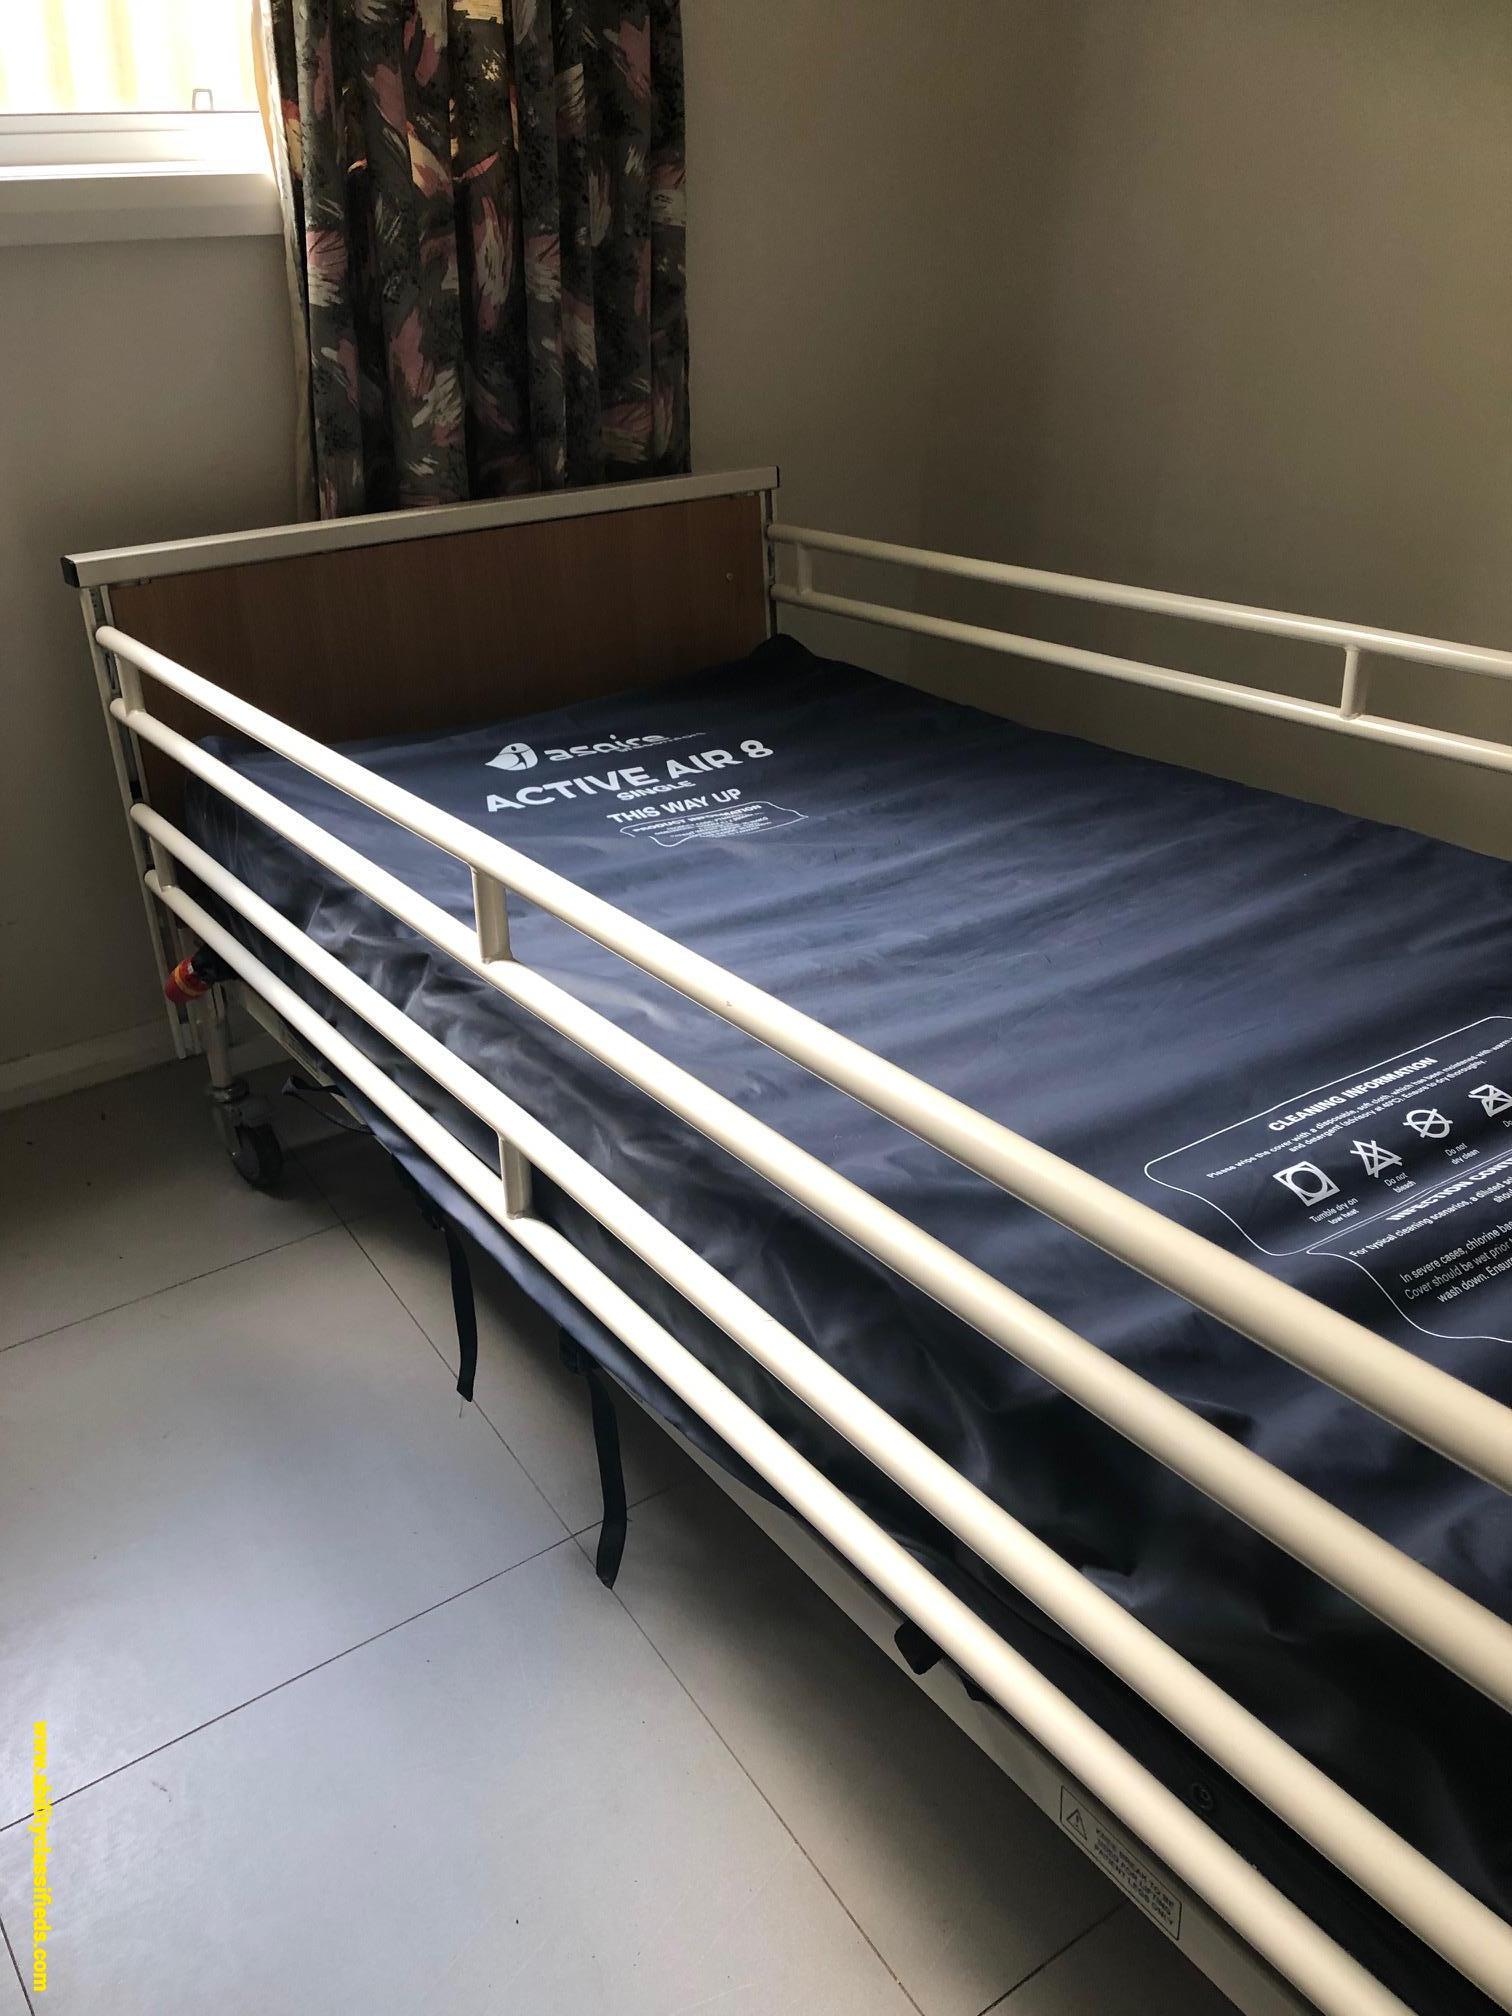 Hospital style bed and air mattress